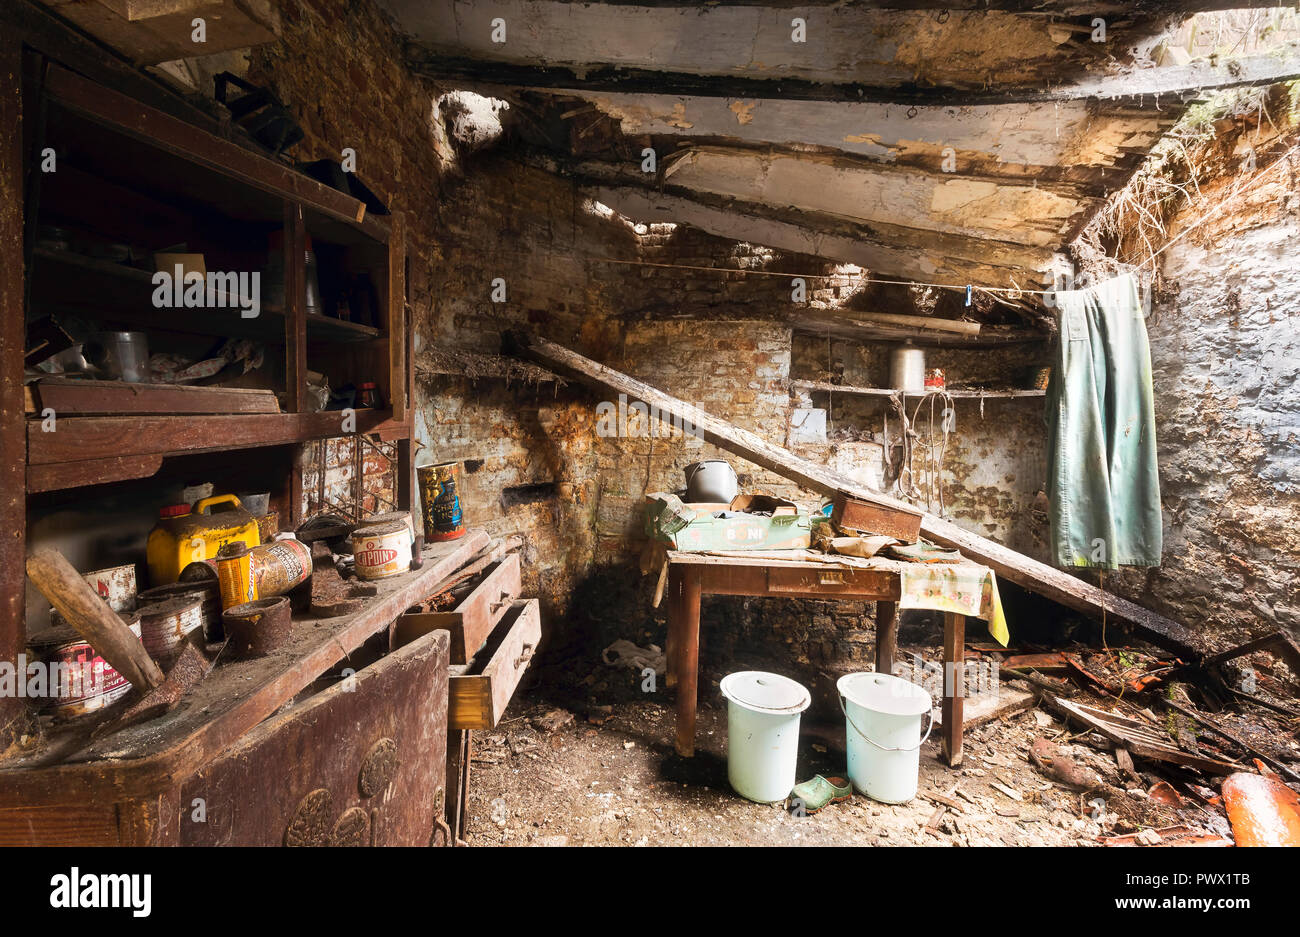 Interior view of a storage room of an abandoned house Stock Photo - Alamy